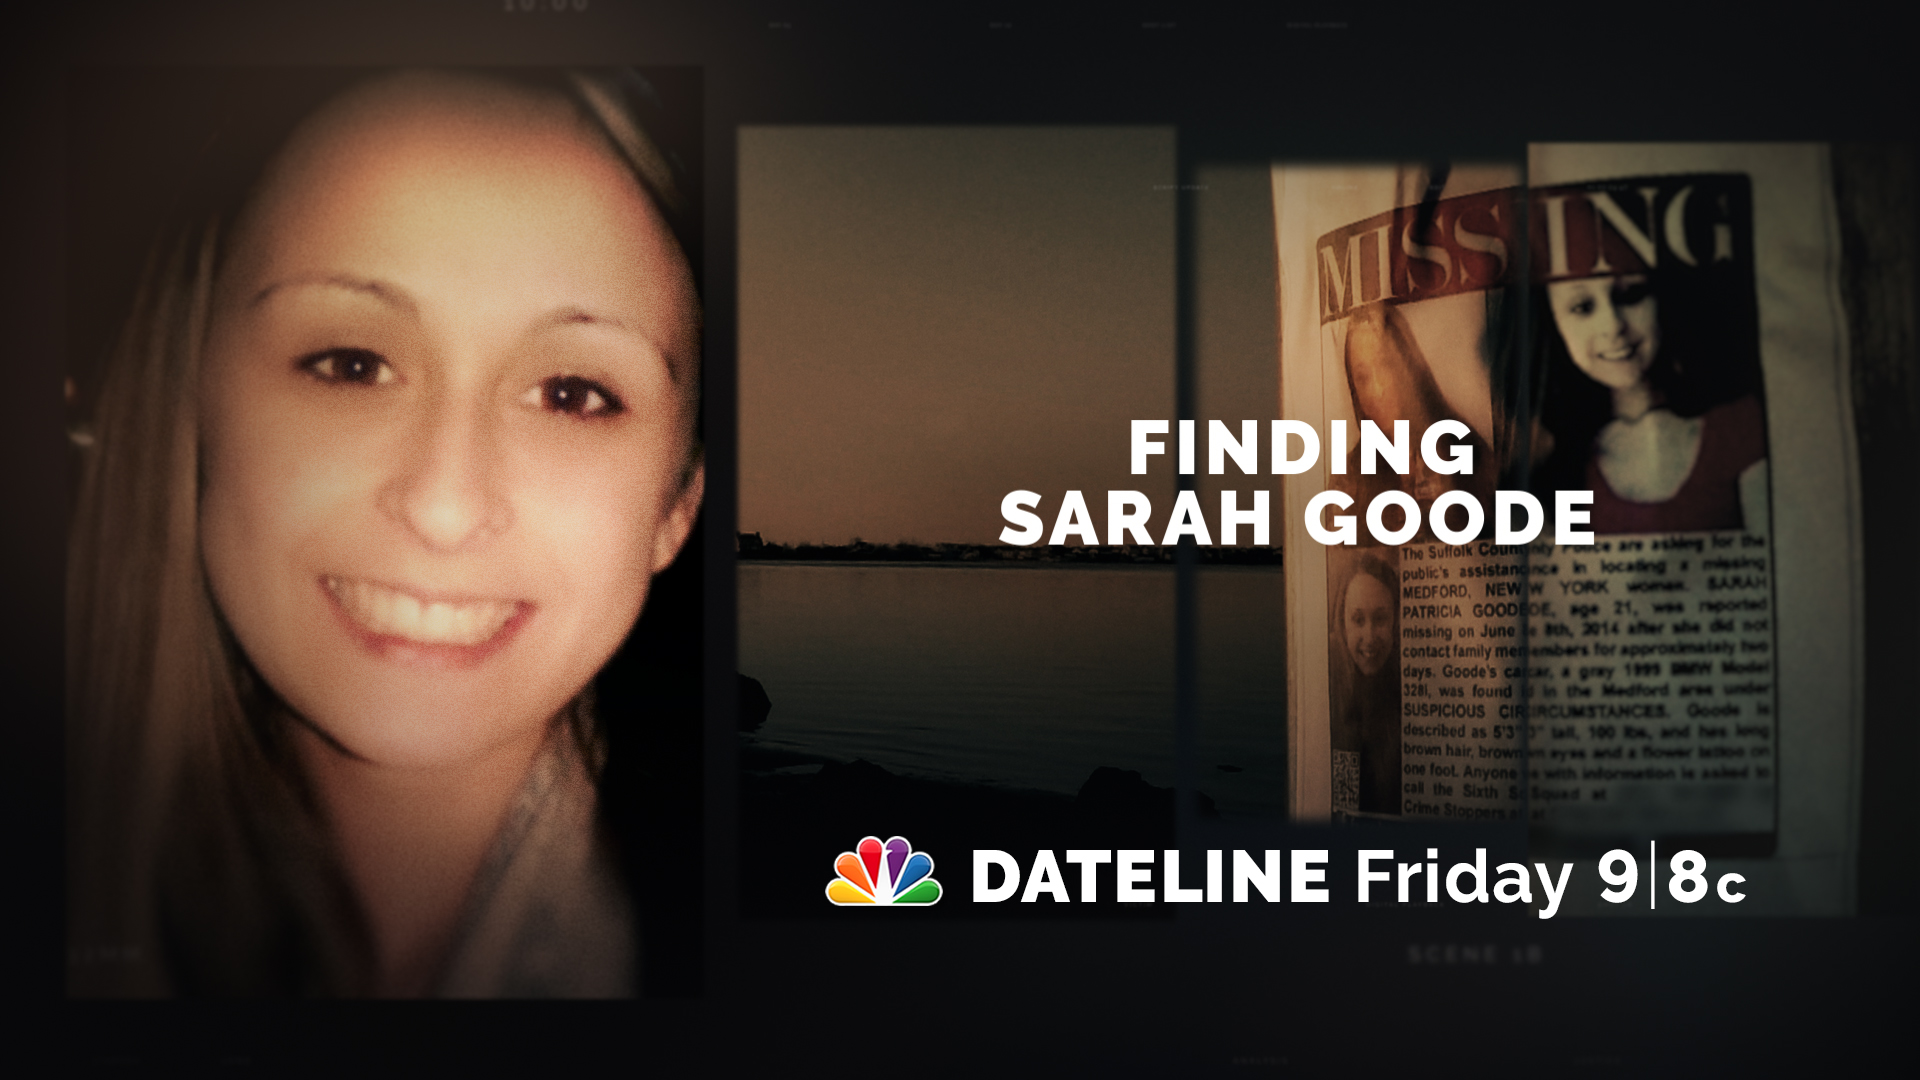 ‘Dateline Finding Sarah Goode’ examines the case of a Long Island